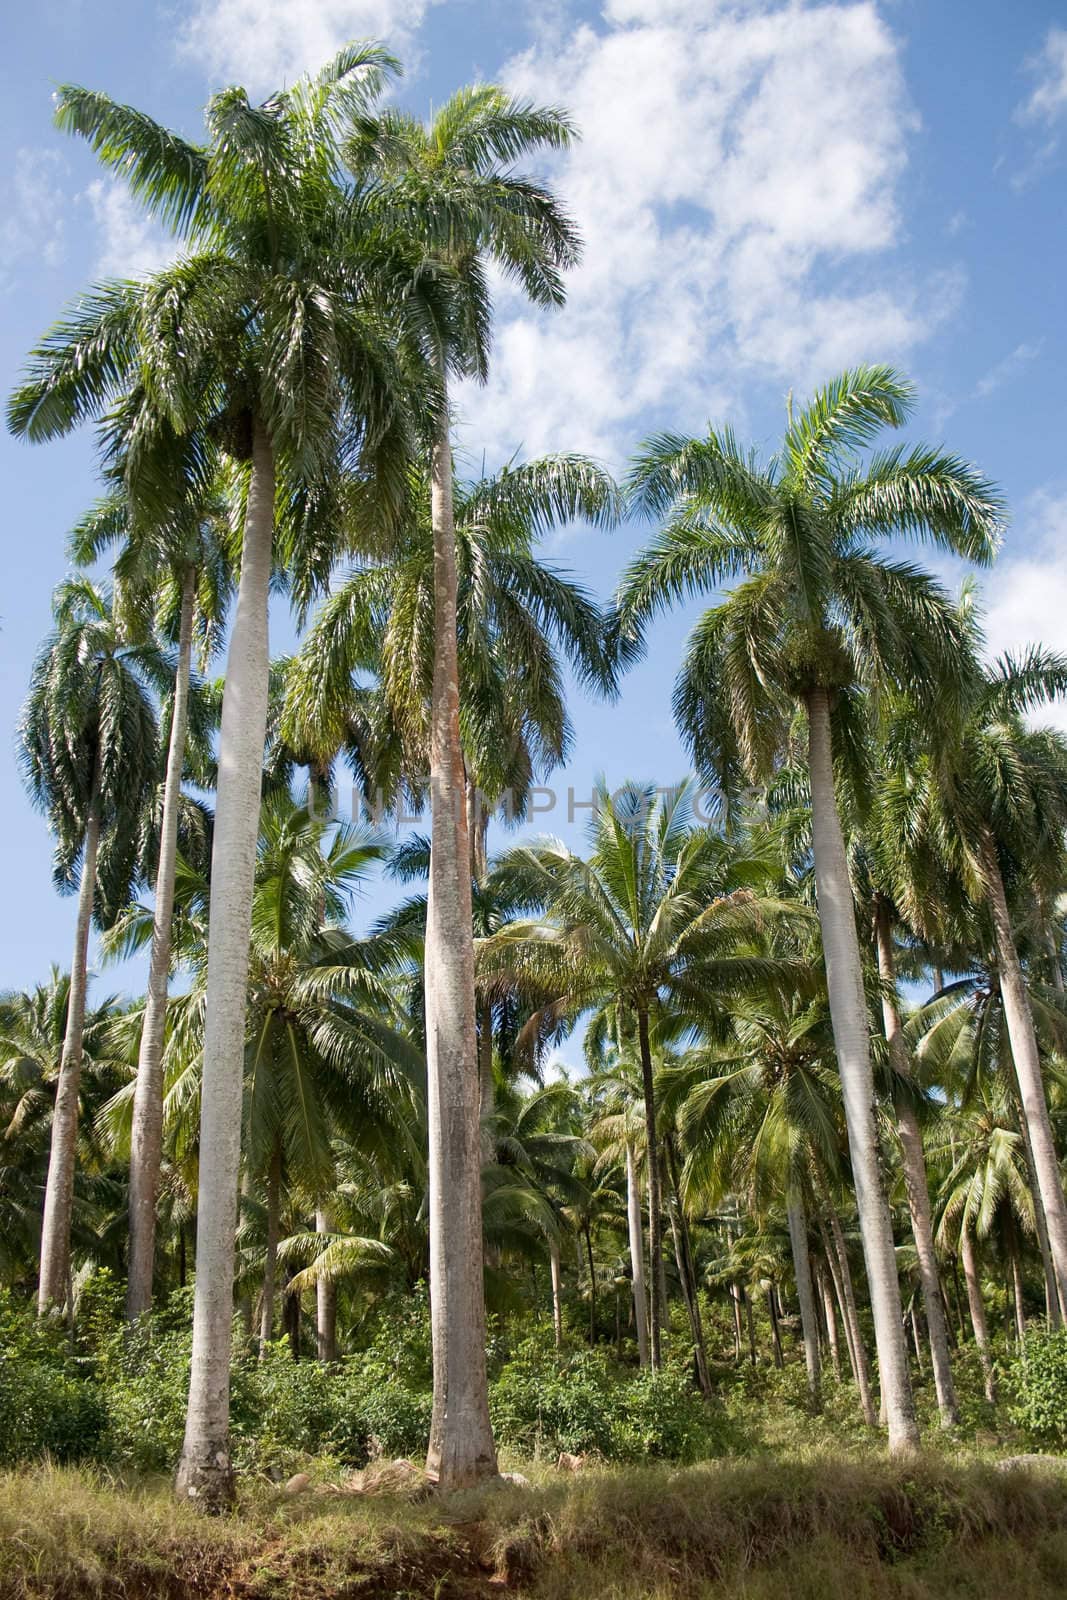 Group of tropical palm trees and a blue sky in a background. Baracoa, Cuba.